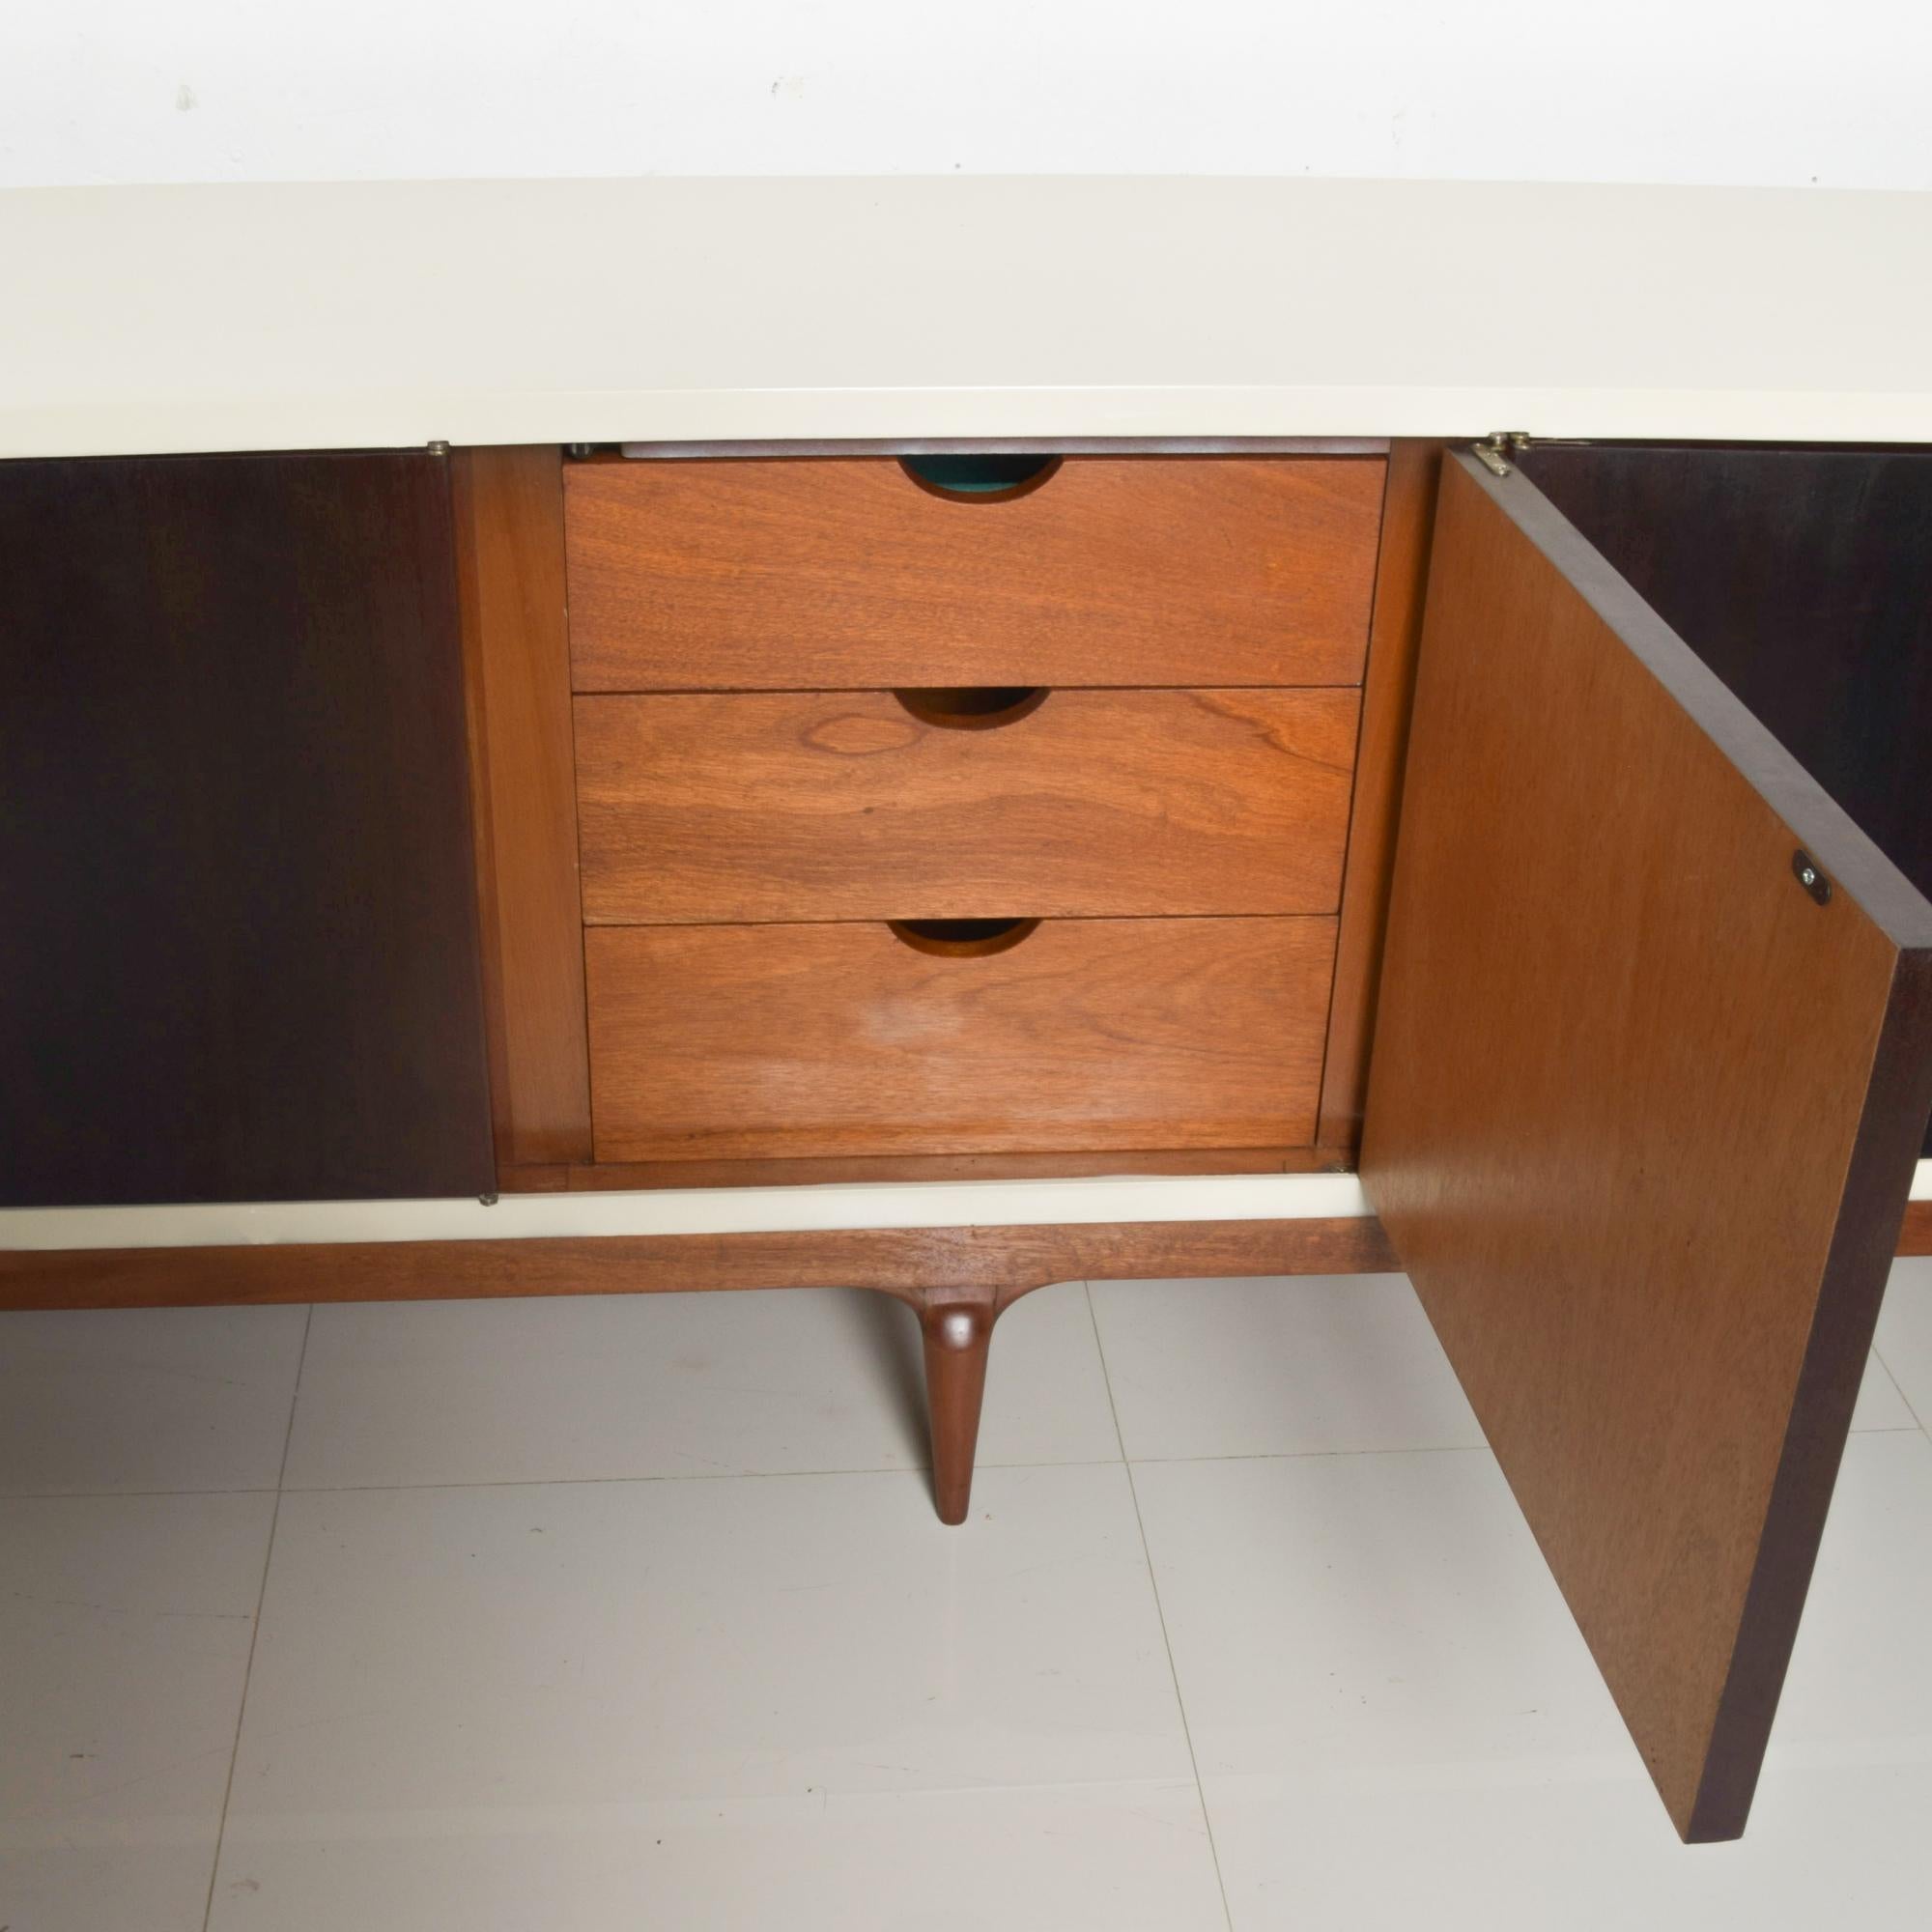 1960s Magnificently Long Credenza Two Tone Lacquer & Wood Monterrey, Mexico For Sale 4